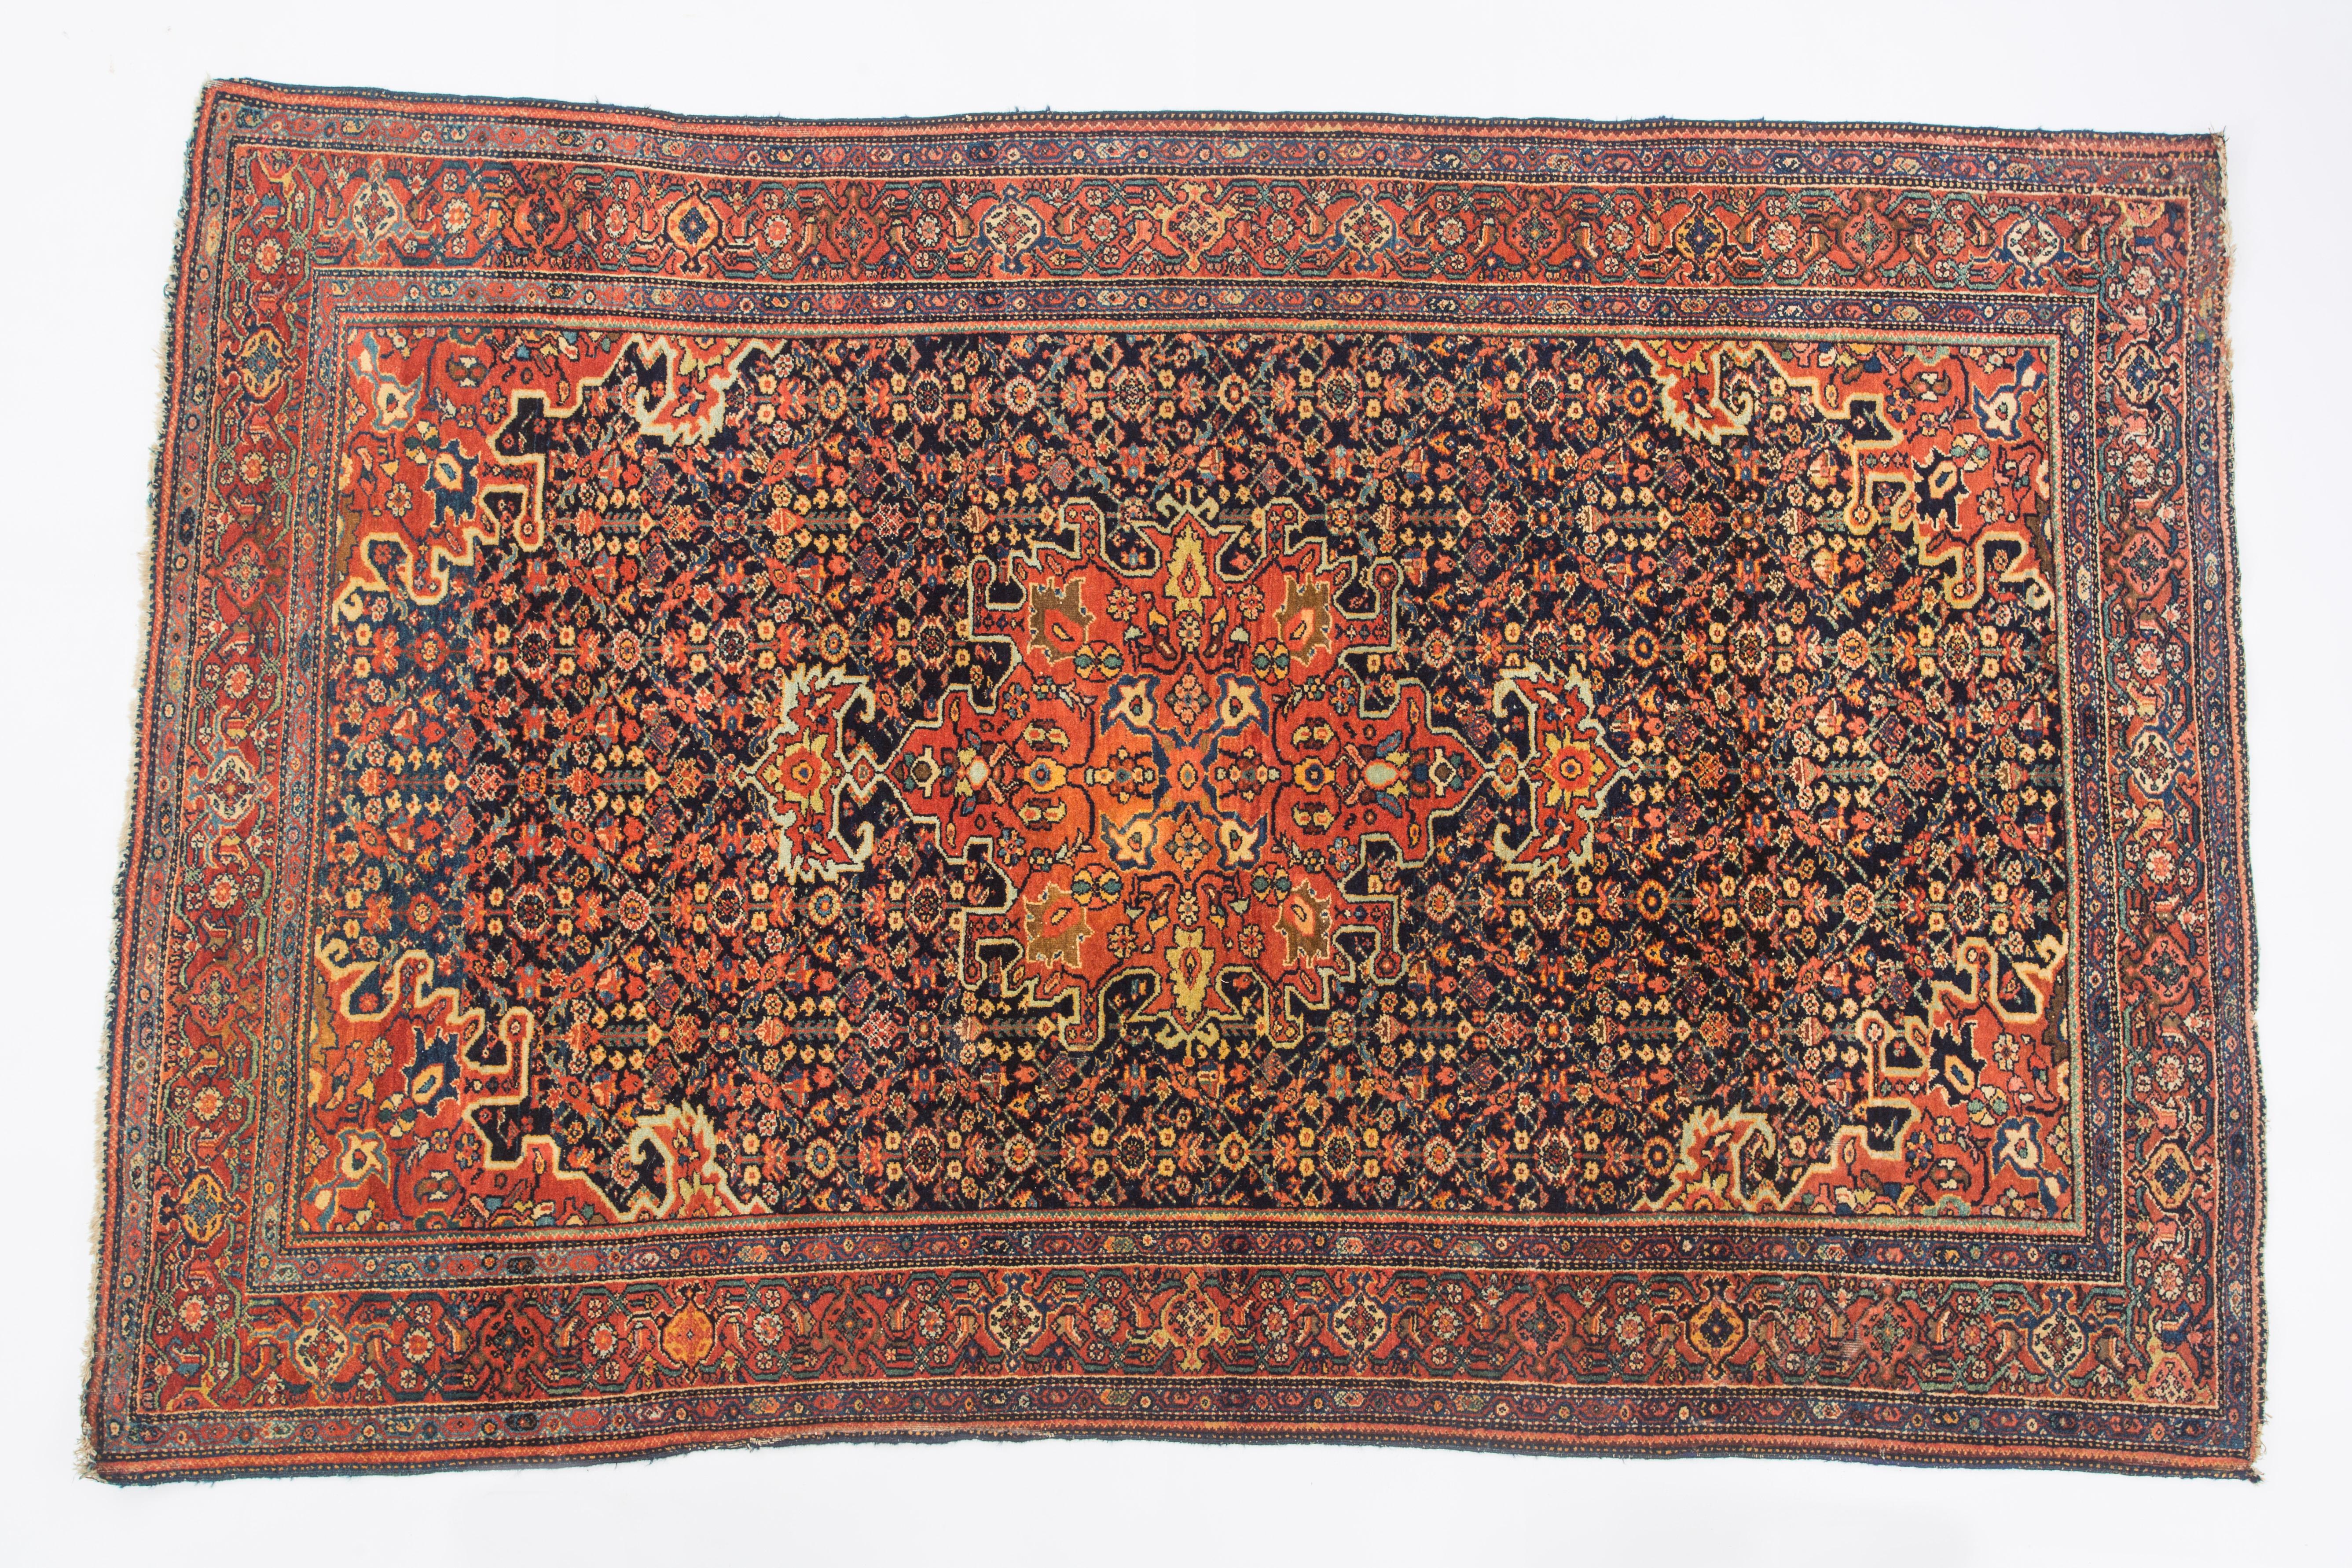 From an Australian Collector

Ferahan Sarouk carpets produced around the wider Arak (formerly Sultanabad) area from about 1850-1910 earned a deserved reputation as amongst the most desirable and imaginative finely woven carpets in Persia. As these